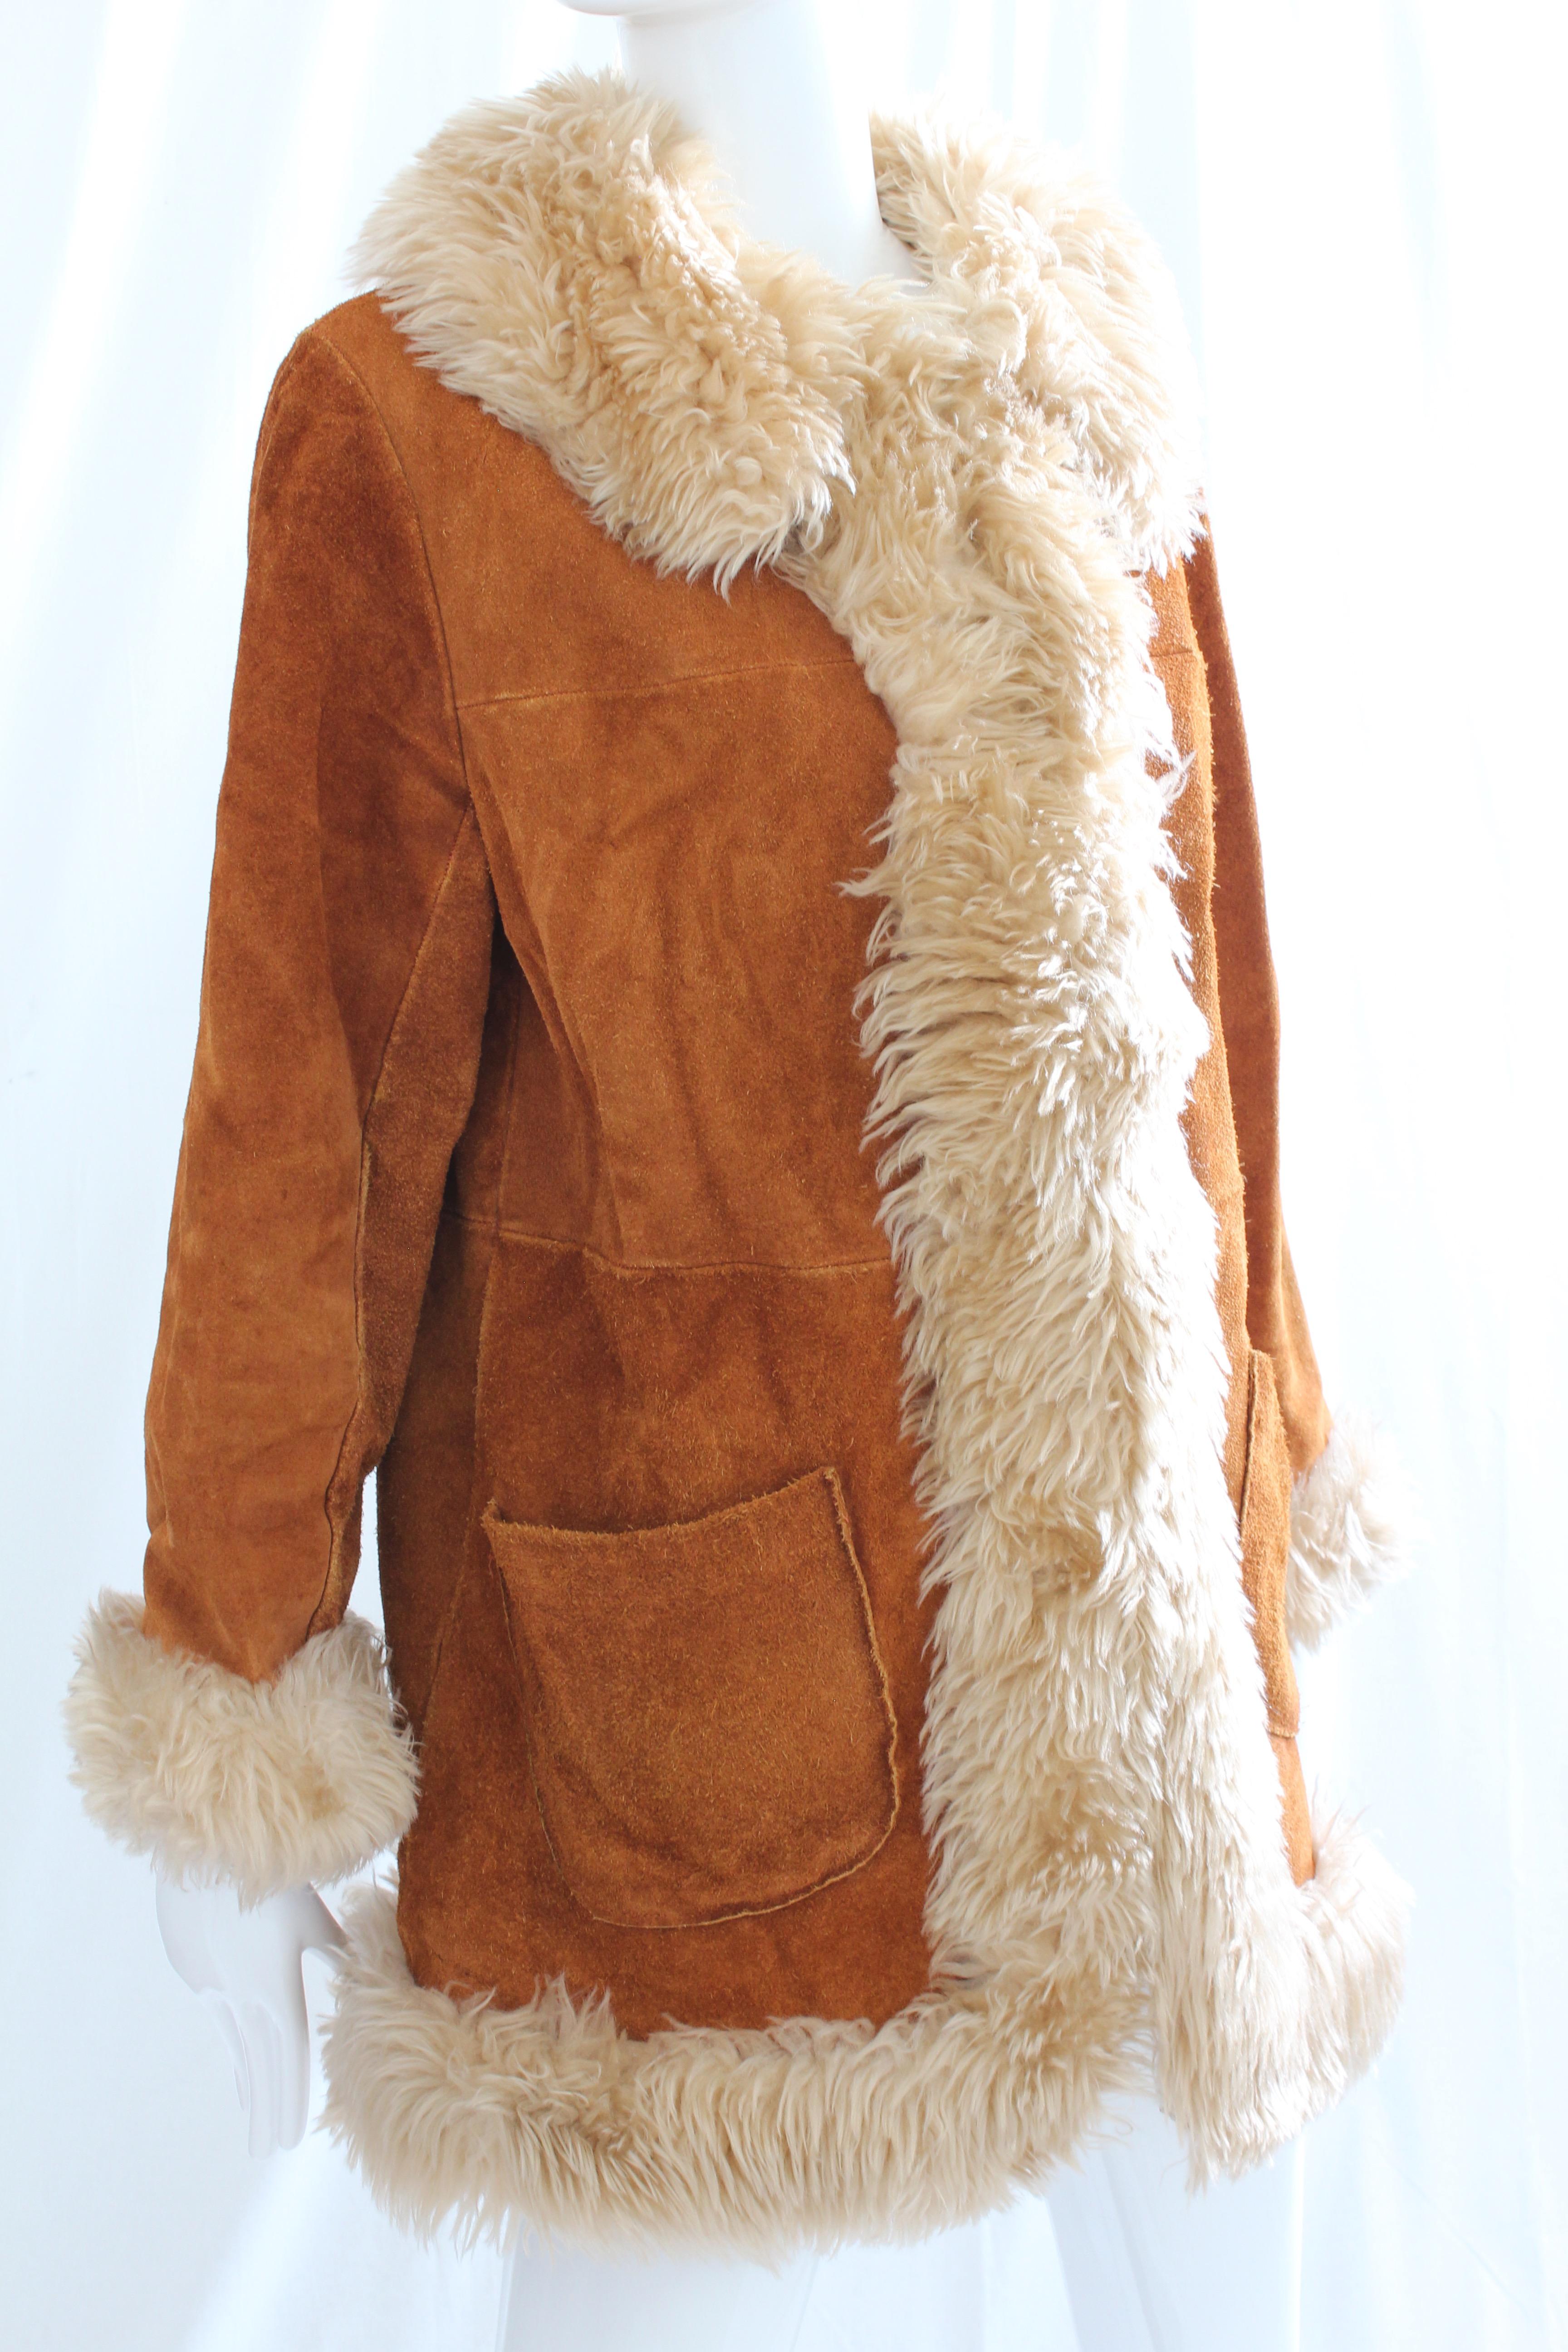 This fabulous vintage coat was made by Leathercraft NYC, most likely in the mid 1970s.  Made from suede leather, it's lined in faux shearling and trimmed in shaggy faux fur.  Fastens with hook/eye fasteners and features two side pockets.  In good